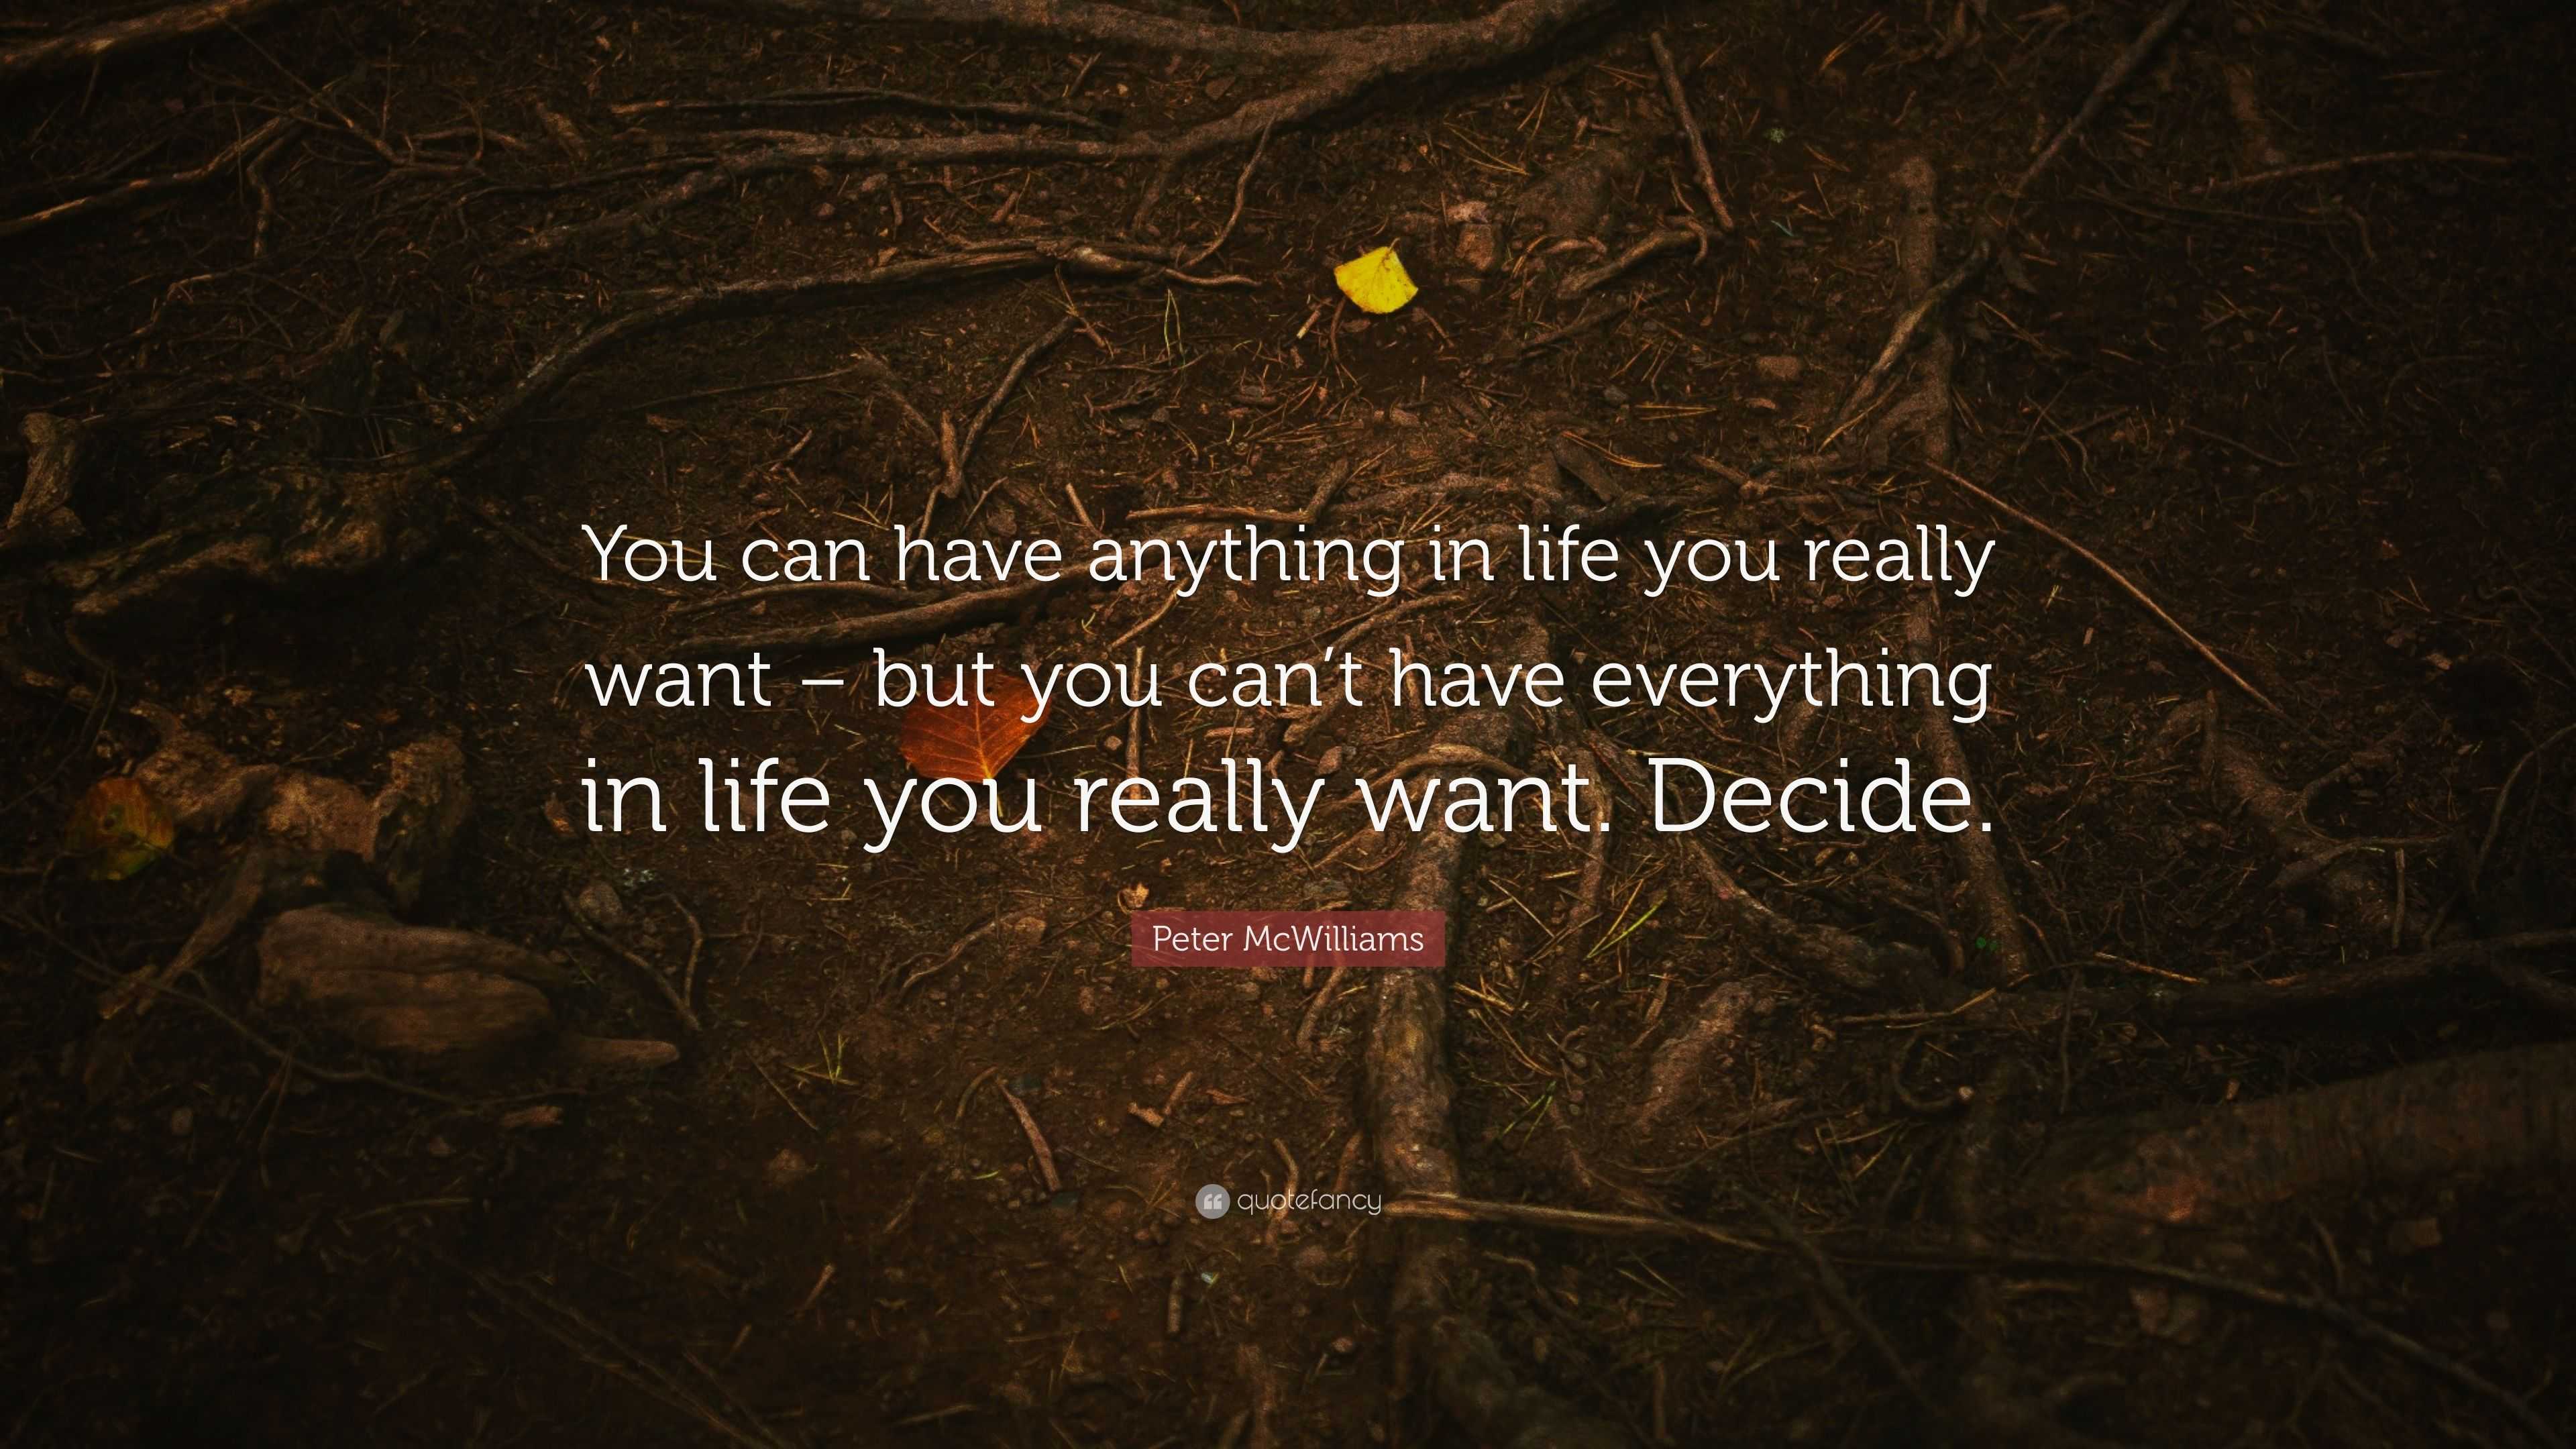 Peter McWilliams Quote: “You can have anything in life you really want ...